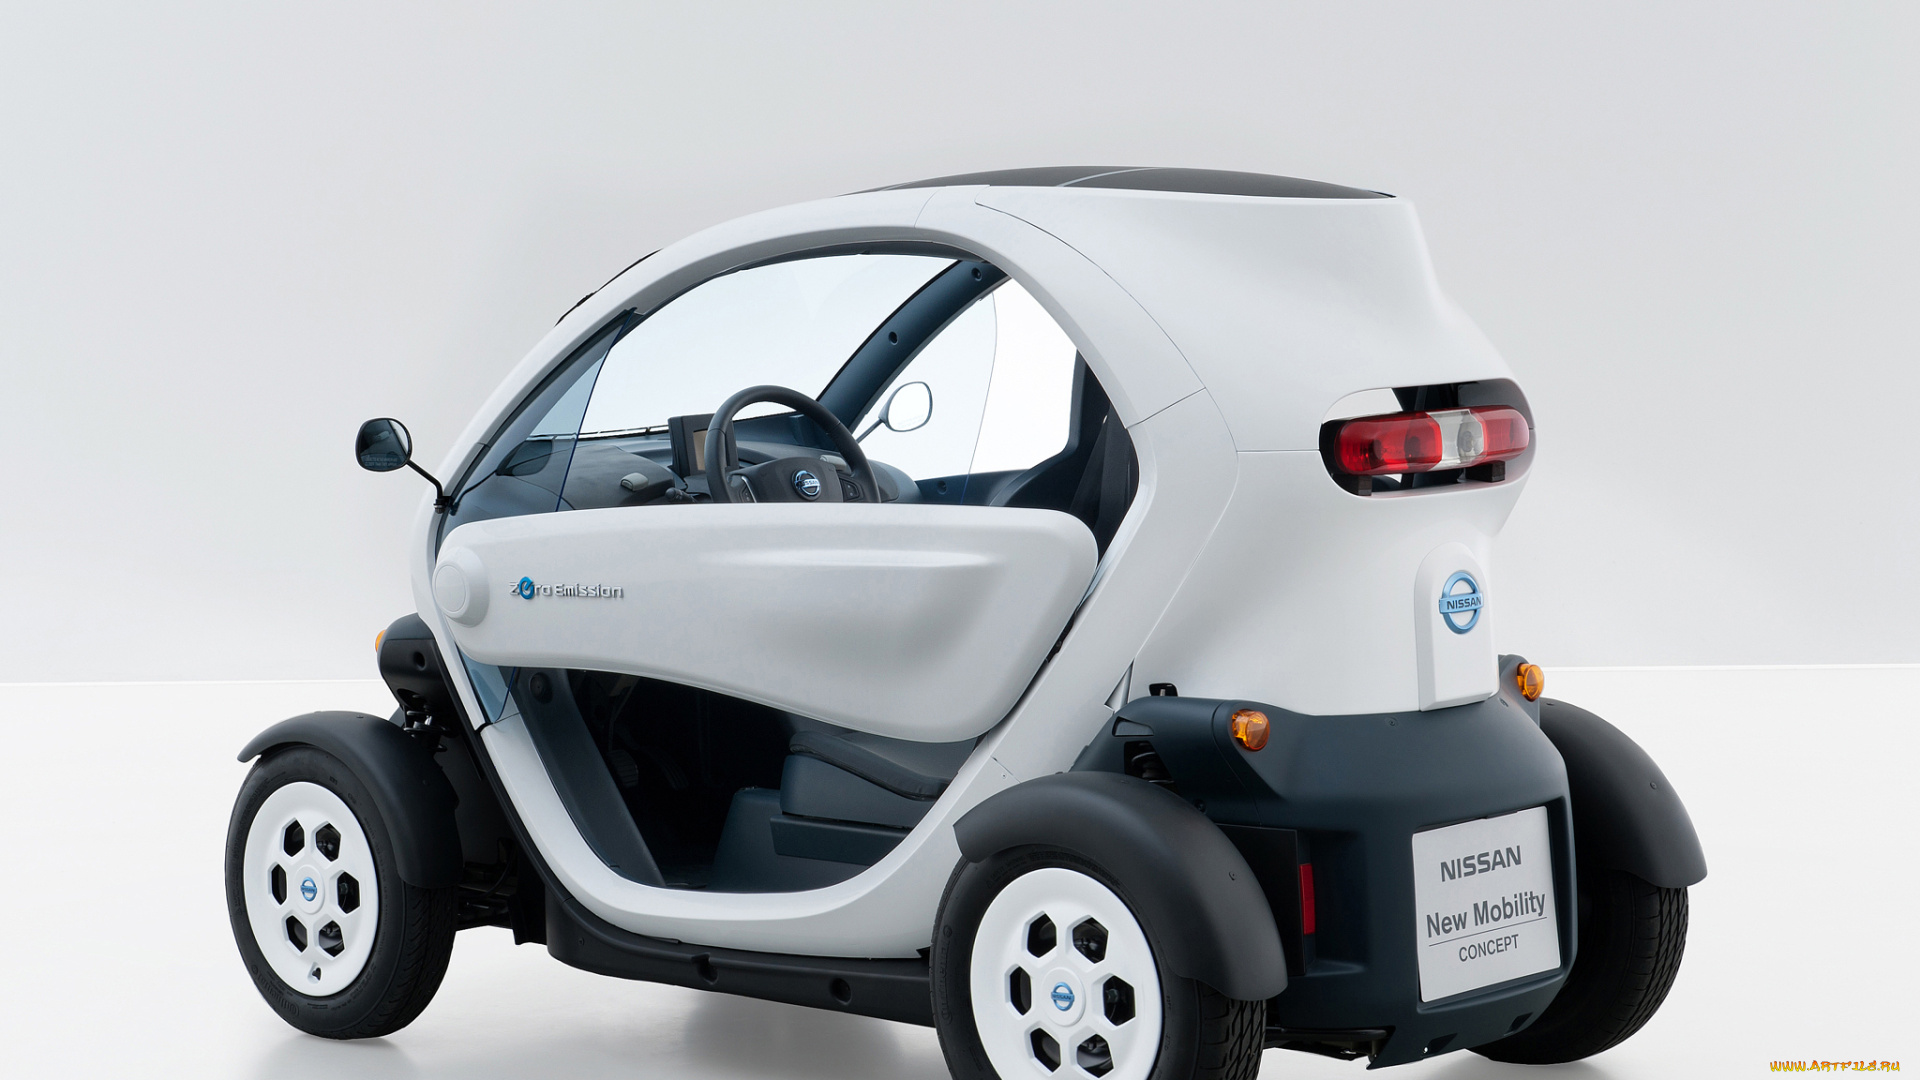 nissan, new, mobility, concept, 2011, автомобили, nissan, datsun, 2011, concept, new, mobility